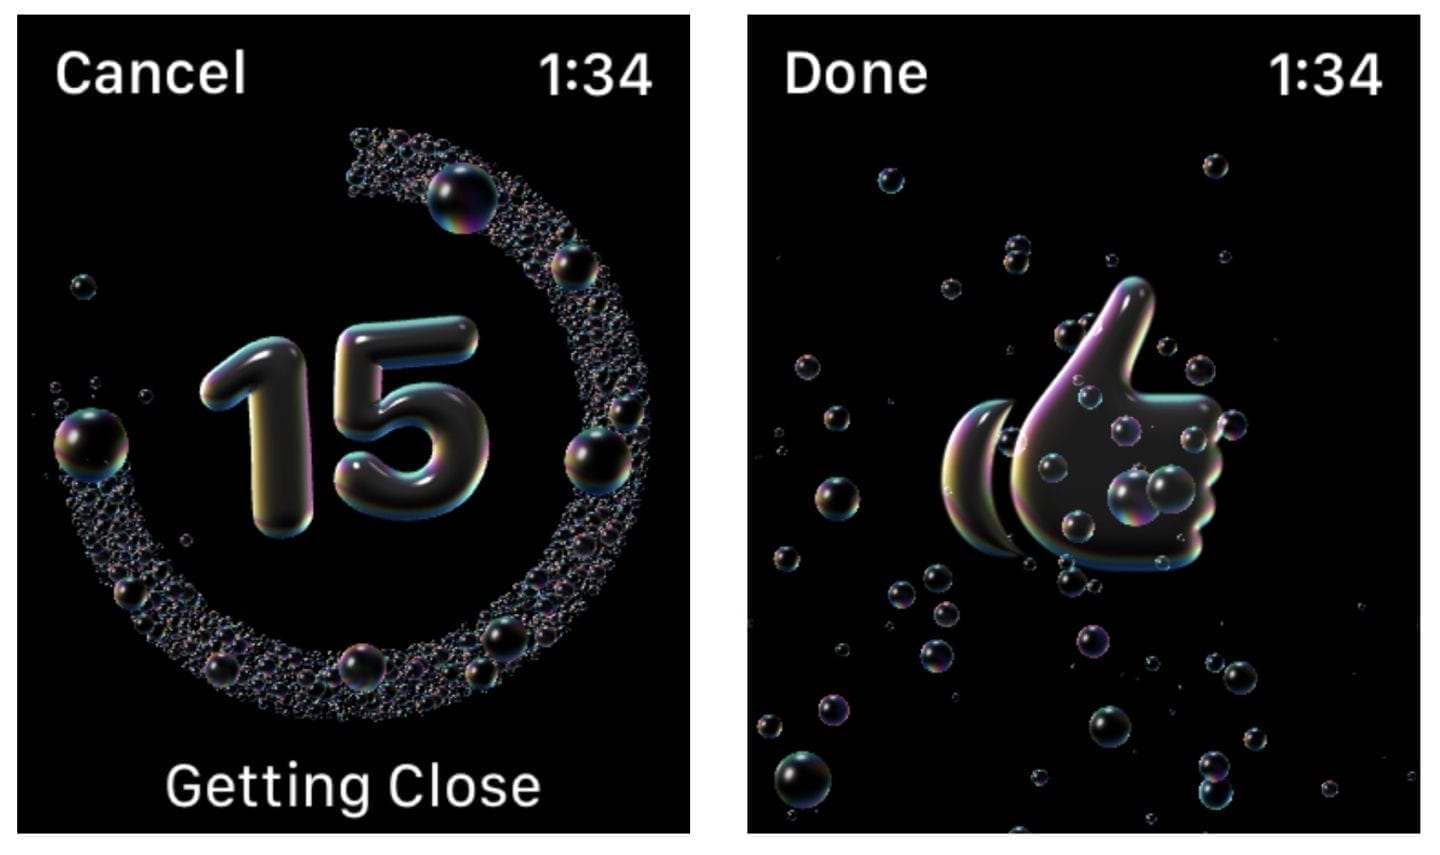 Your Apple Watch counts down the time, then signals that your hands are clean with a chime and a soapy thumbs-up